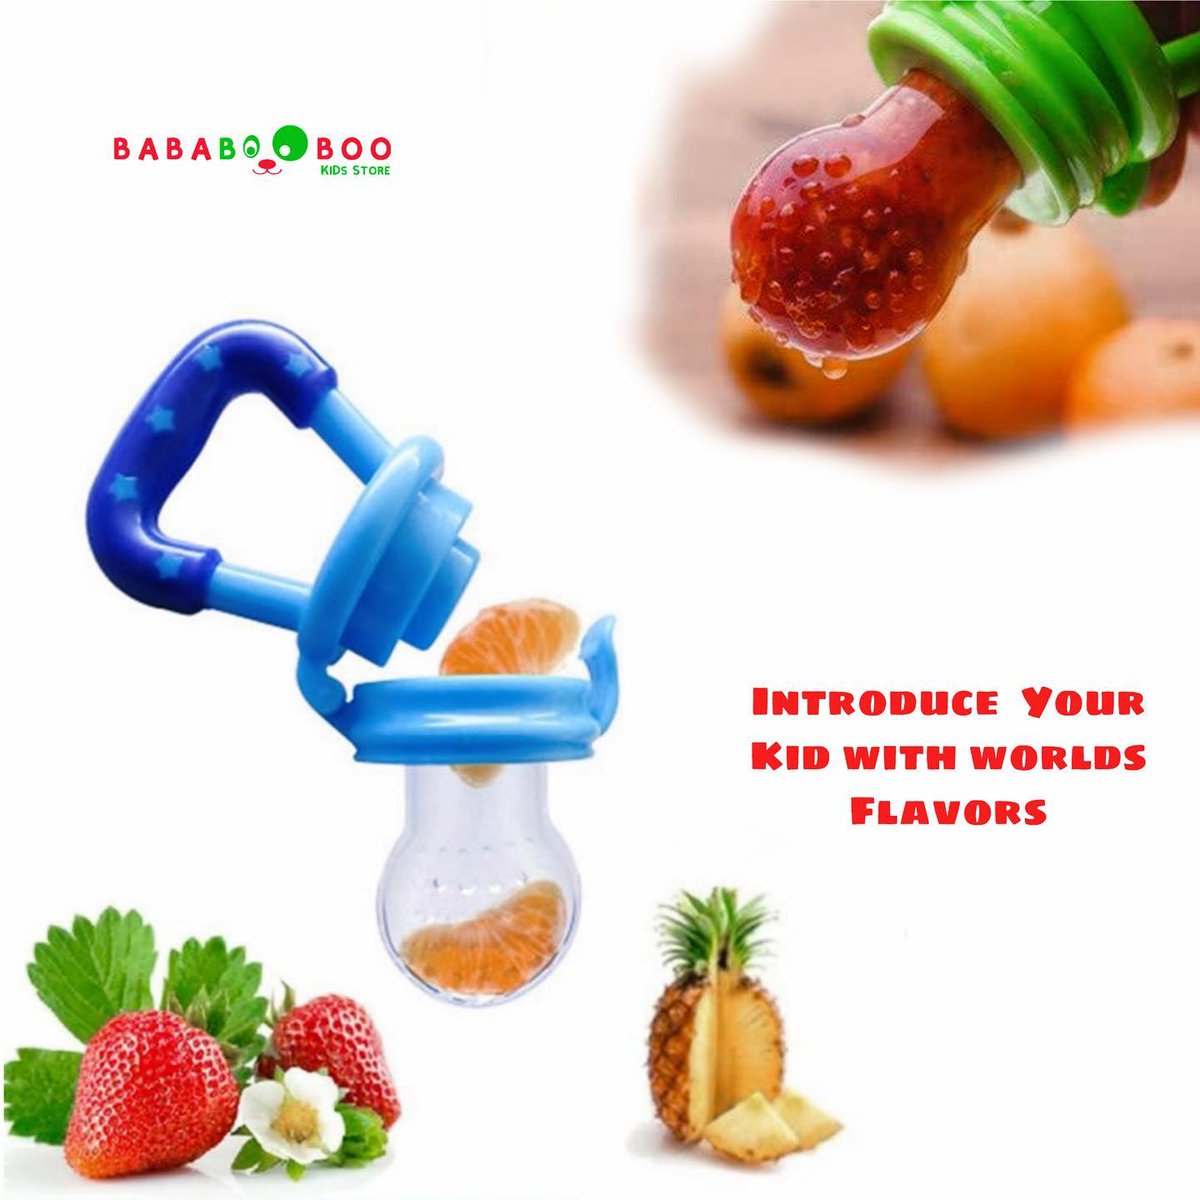 Buy Cheapest : instagram.com/p/CQccmPQLdLG/ or whats app on 8384089080 or Go to Khadistan.com

Introduce your little one to flavours #teether #instantjuice #flavours #weening #infant #tasty #easyuse #mothercare #selffeeding #easyrecipes #fruits #bababooboo #qualityass